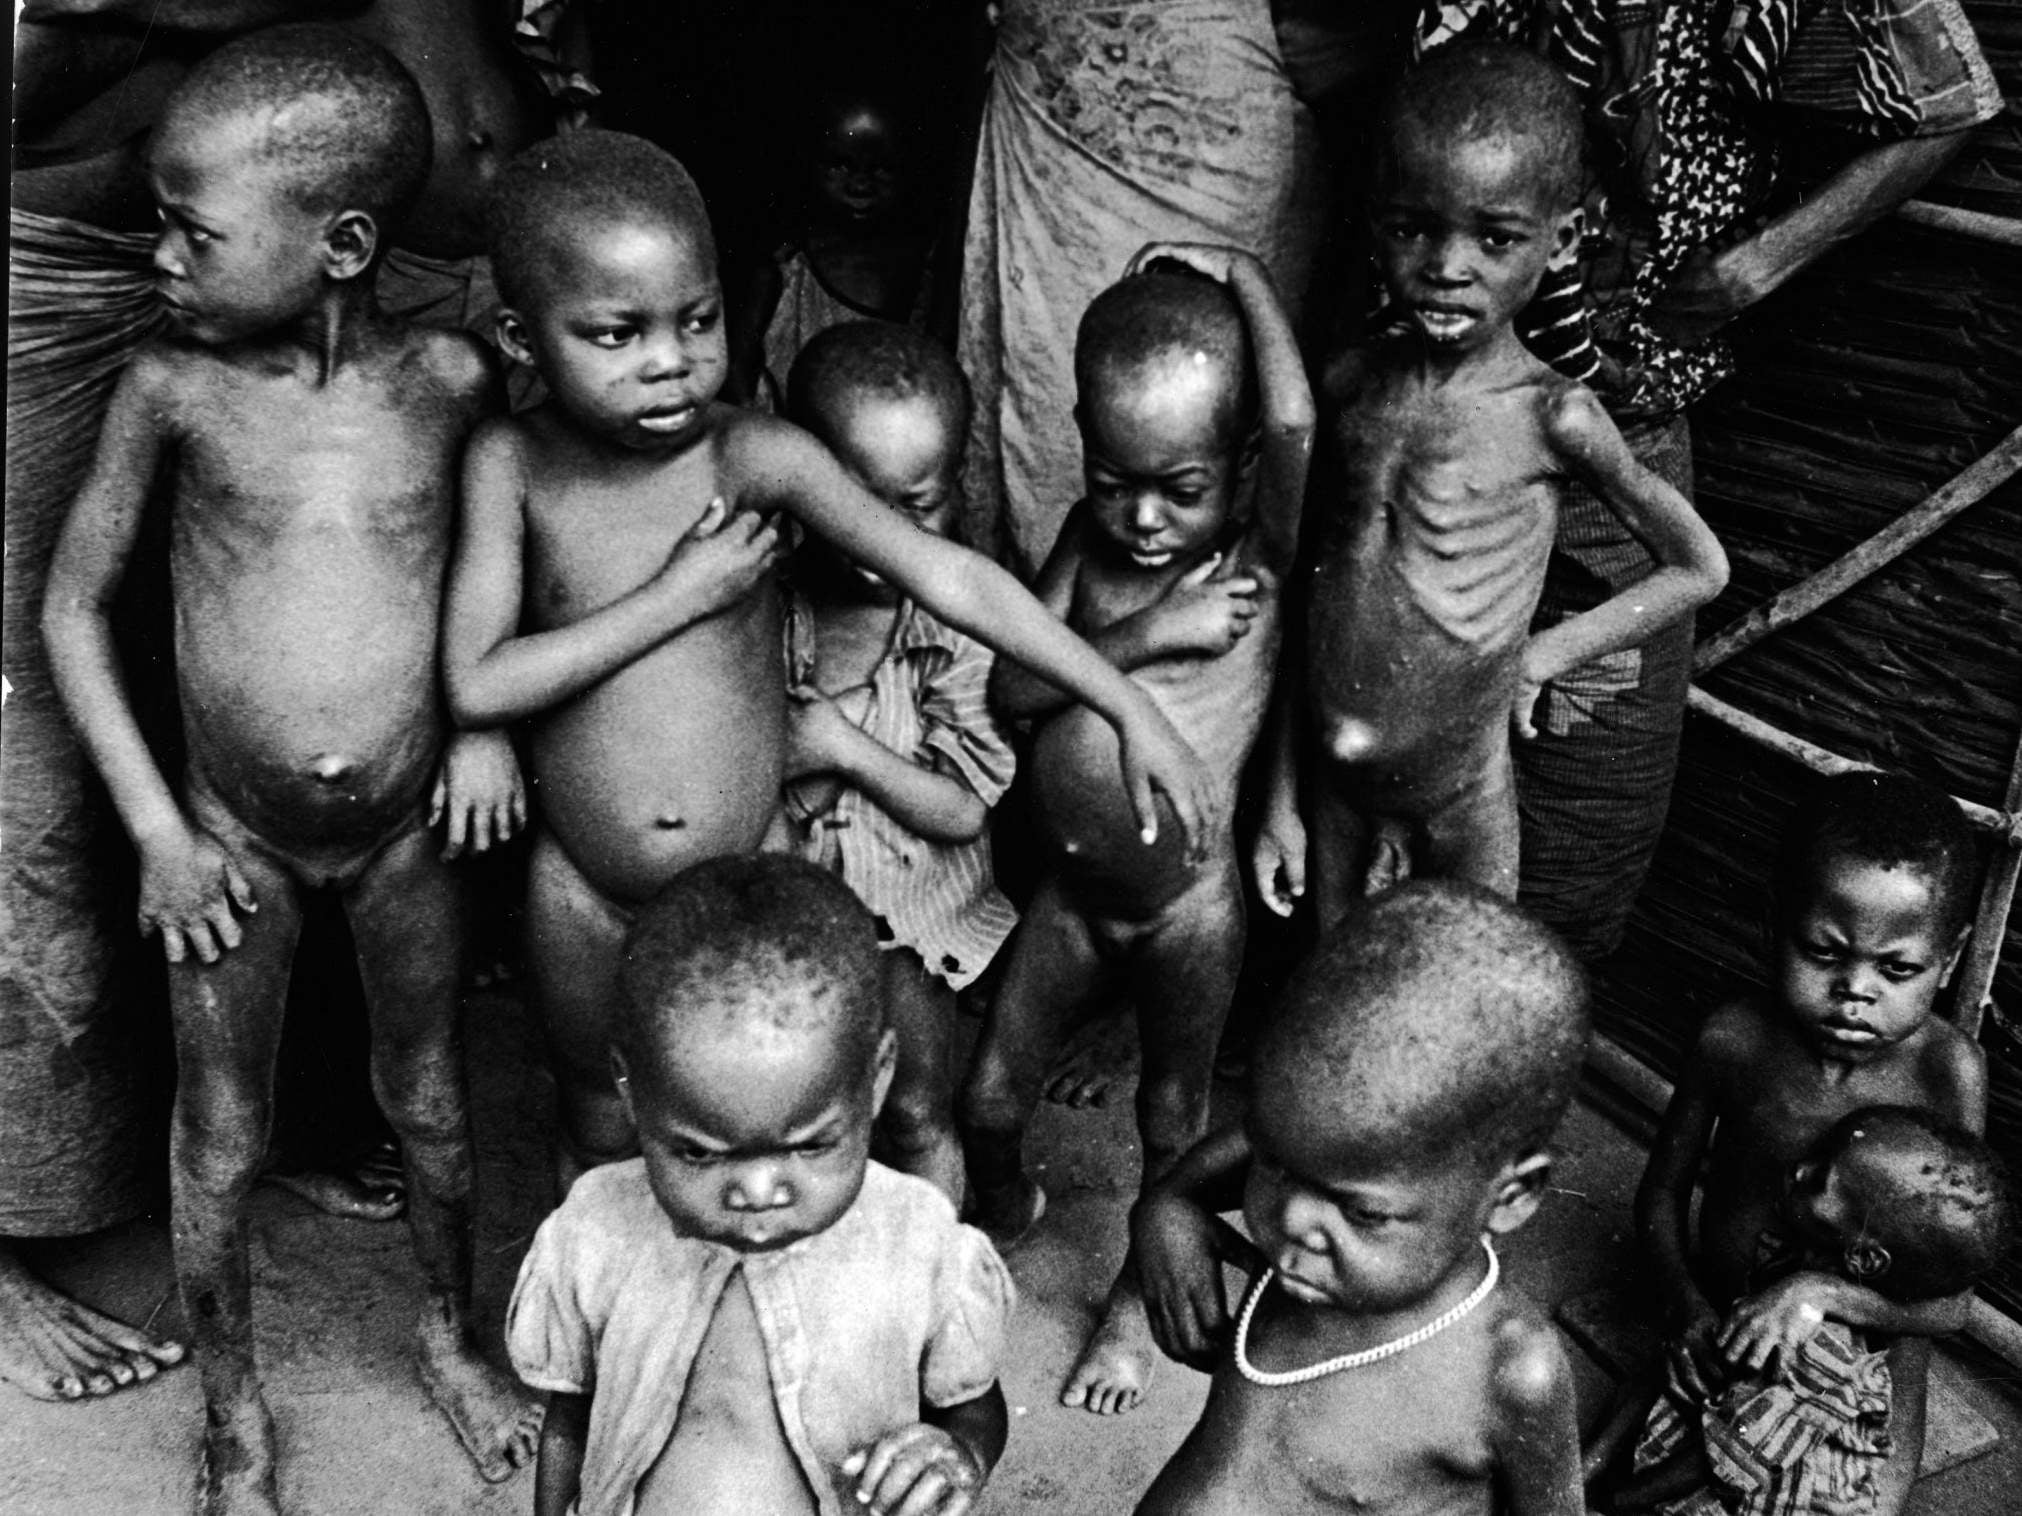 War victims: starving children with distended bellies